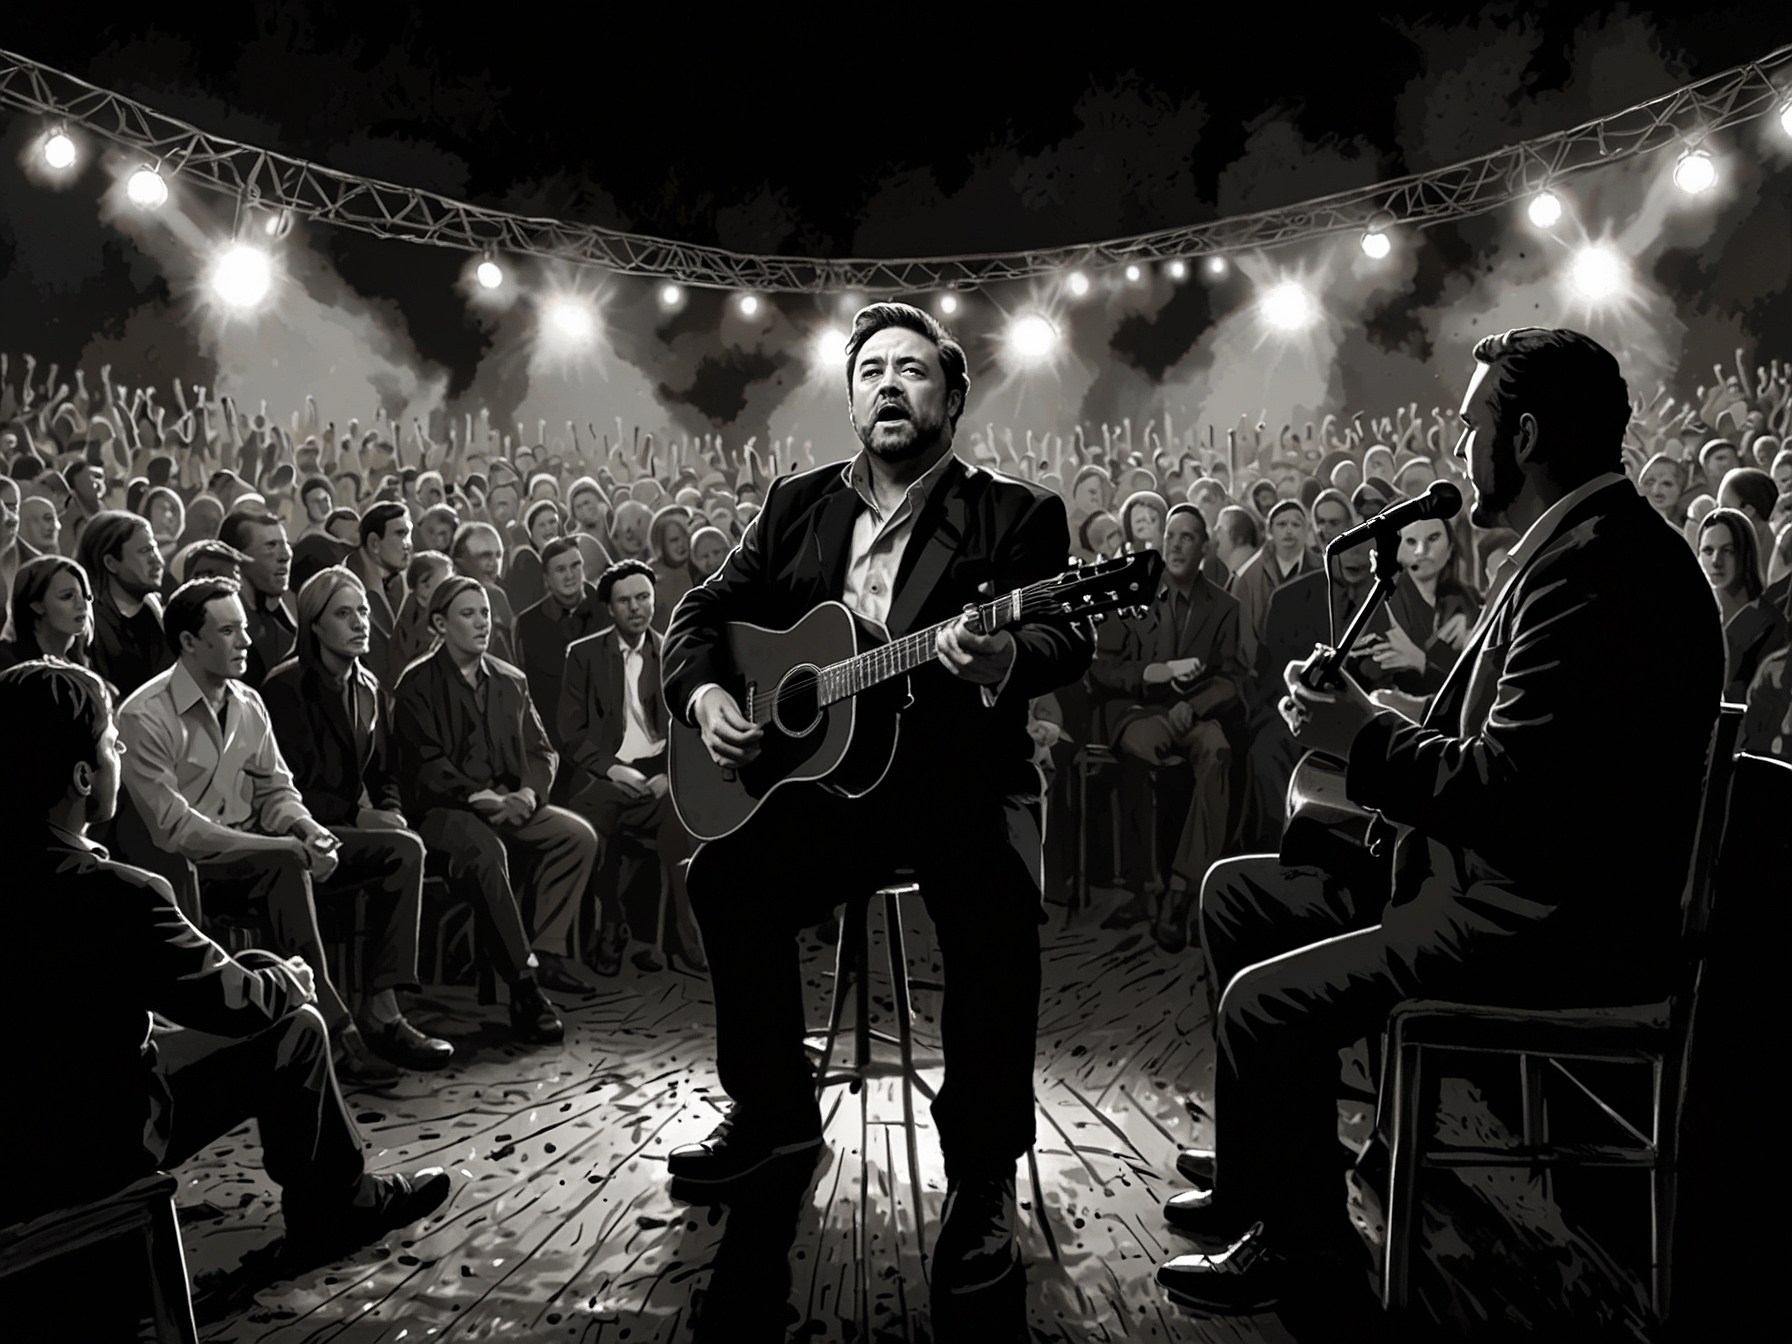 The Indoor Garden Party, led by Russell Crowe, performing 'Folsom Prison Blues' by Johnny Cash at Glastonbury 2024. The audience sings along, creating a unifying and electrifying atmosphere.